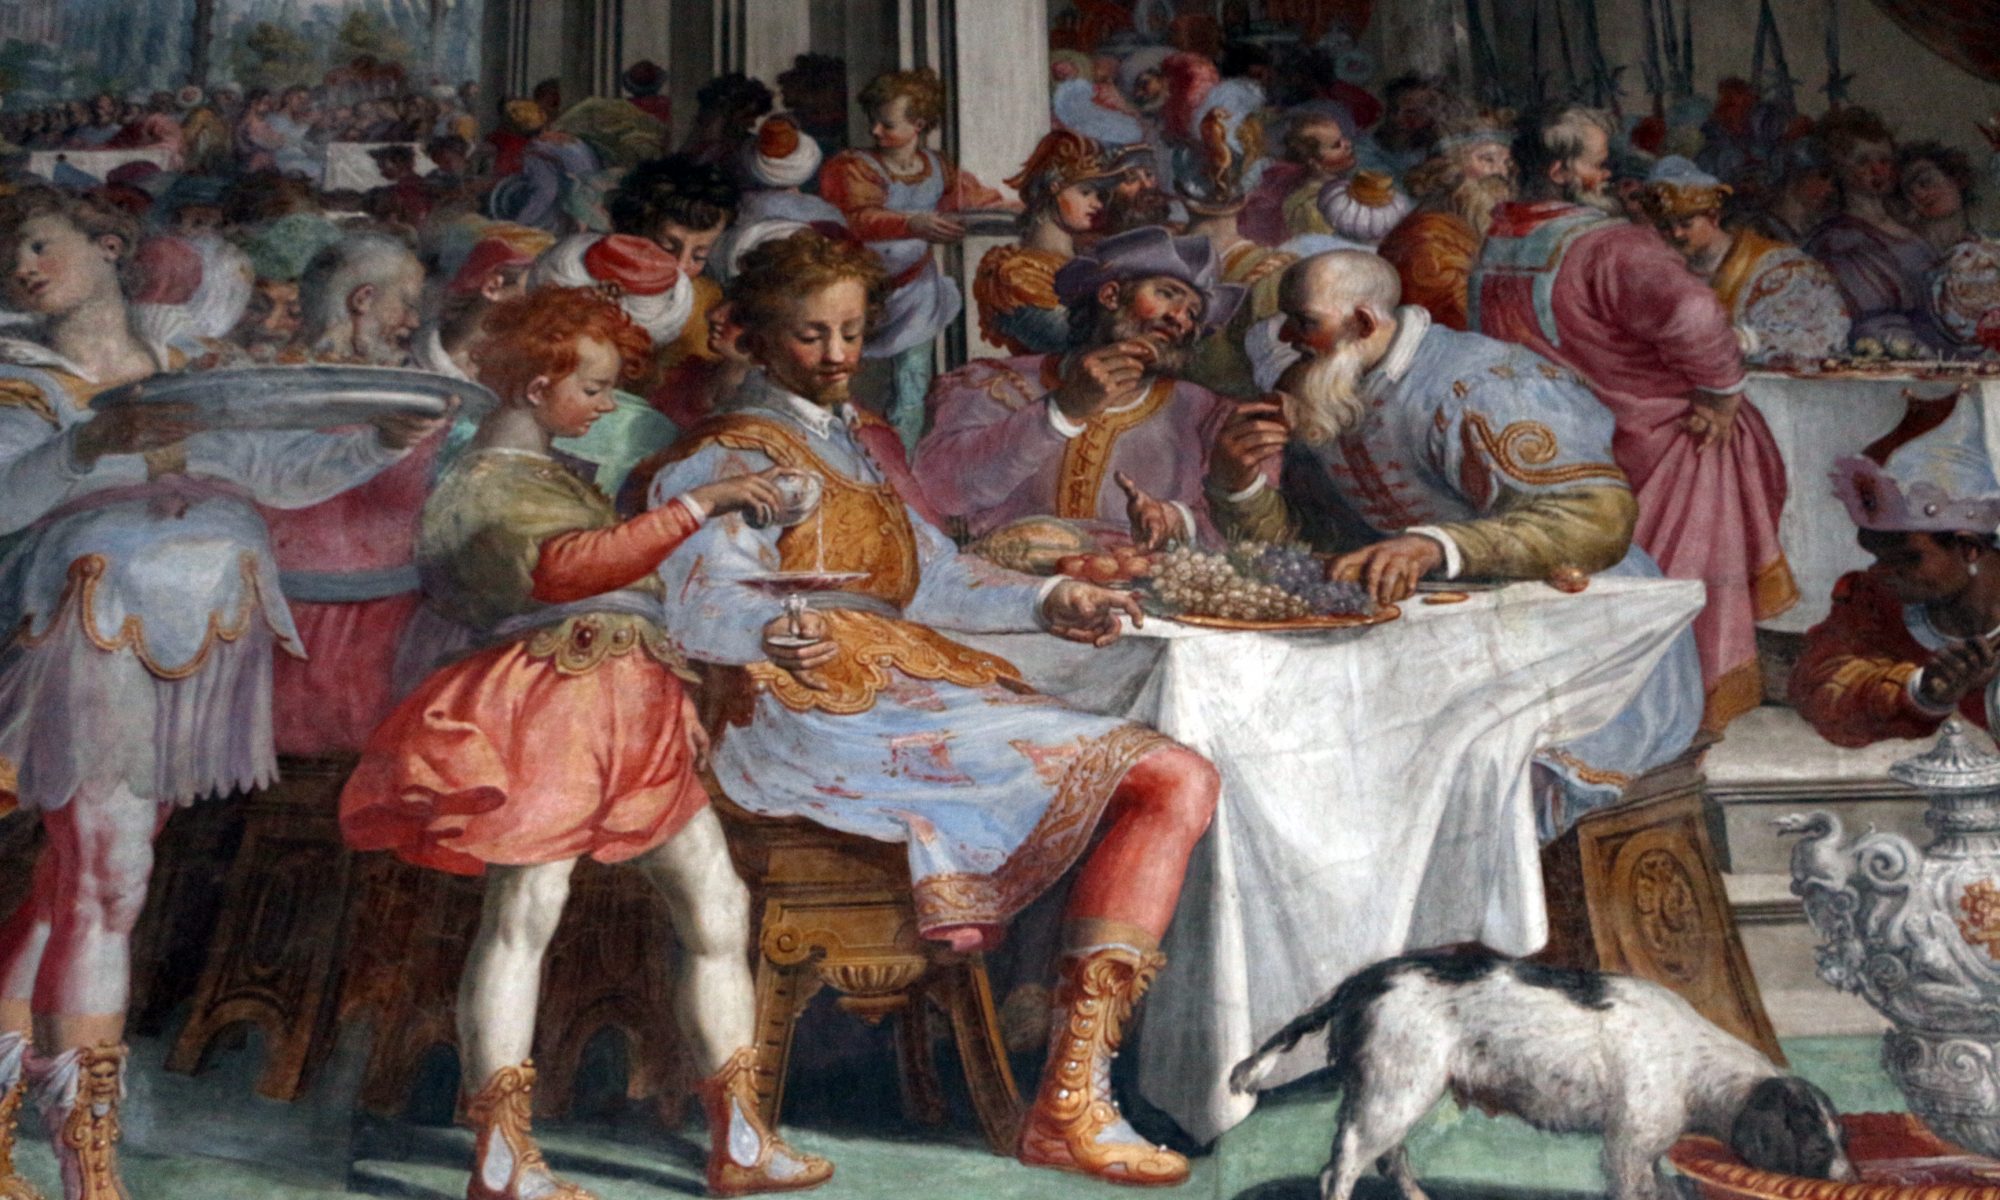 This fresco painting (1590-94) by Agostino Ciampelli depicts a lively and crowded banquet. The painting is situated in Palazzo Tornabuoni, a privately owned Renaissance palace in Florence.